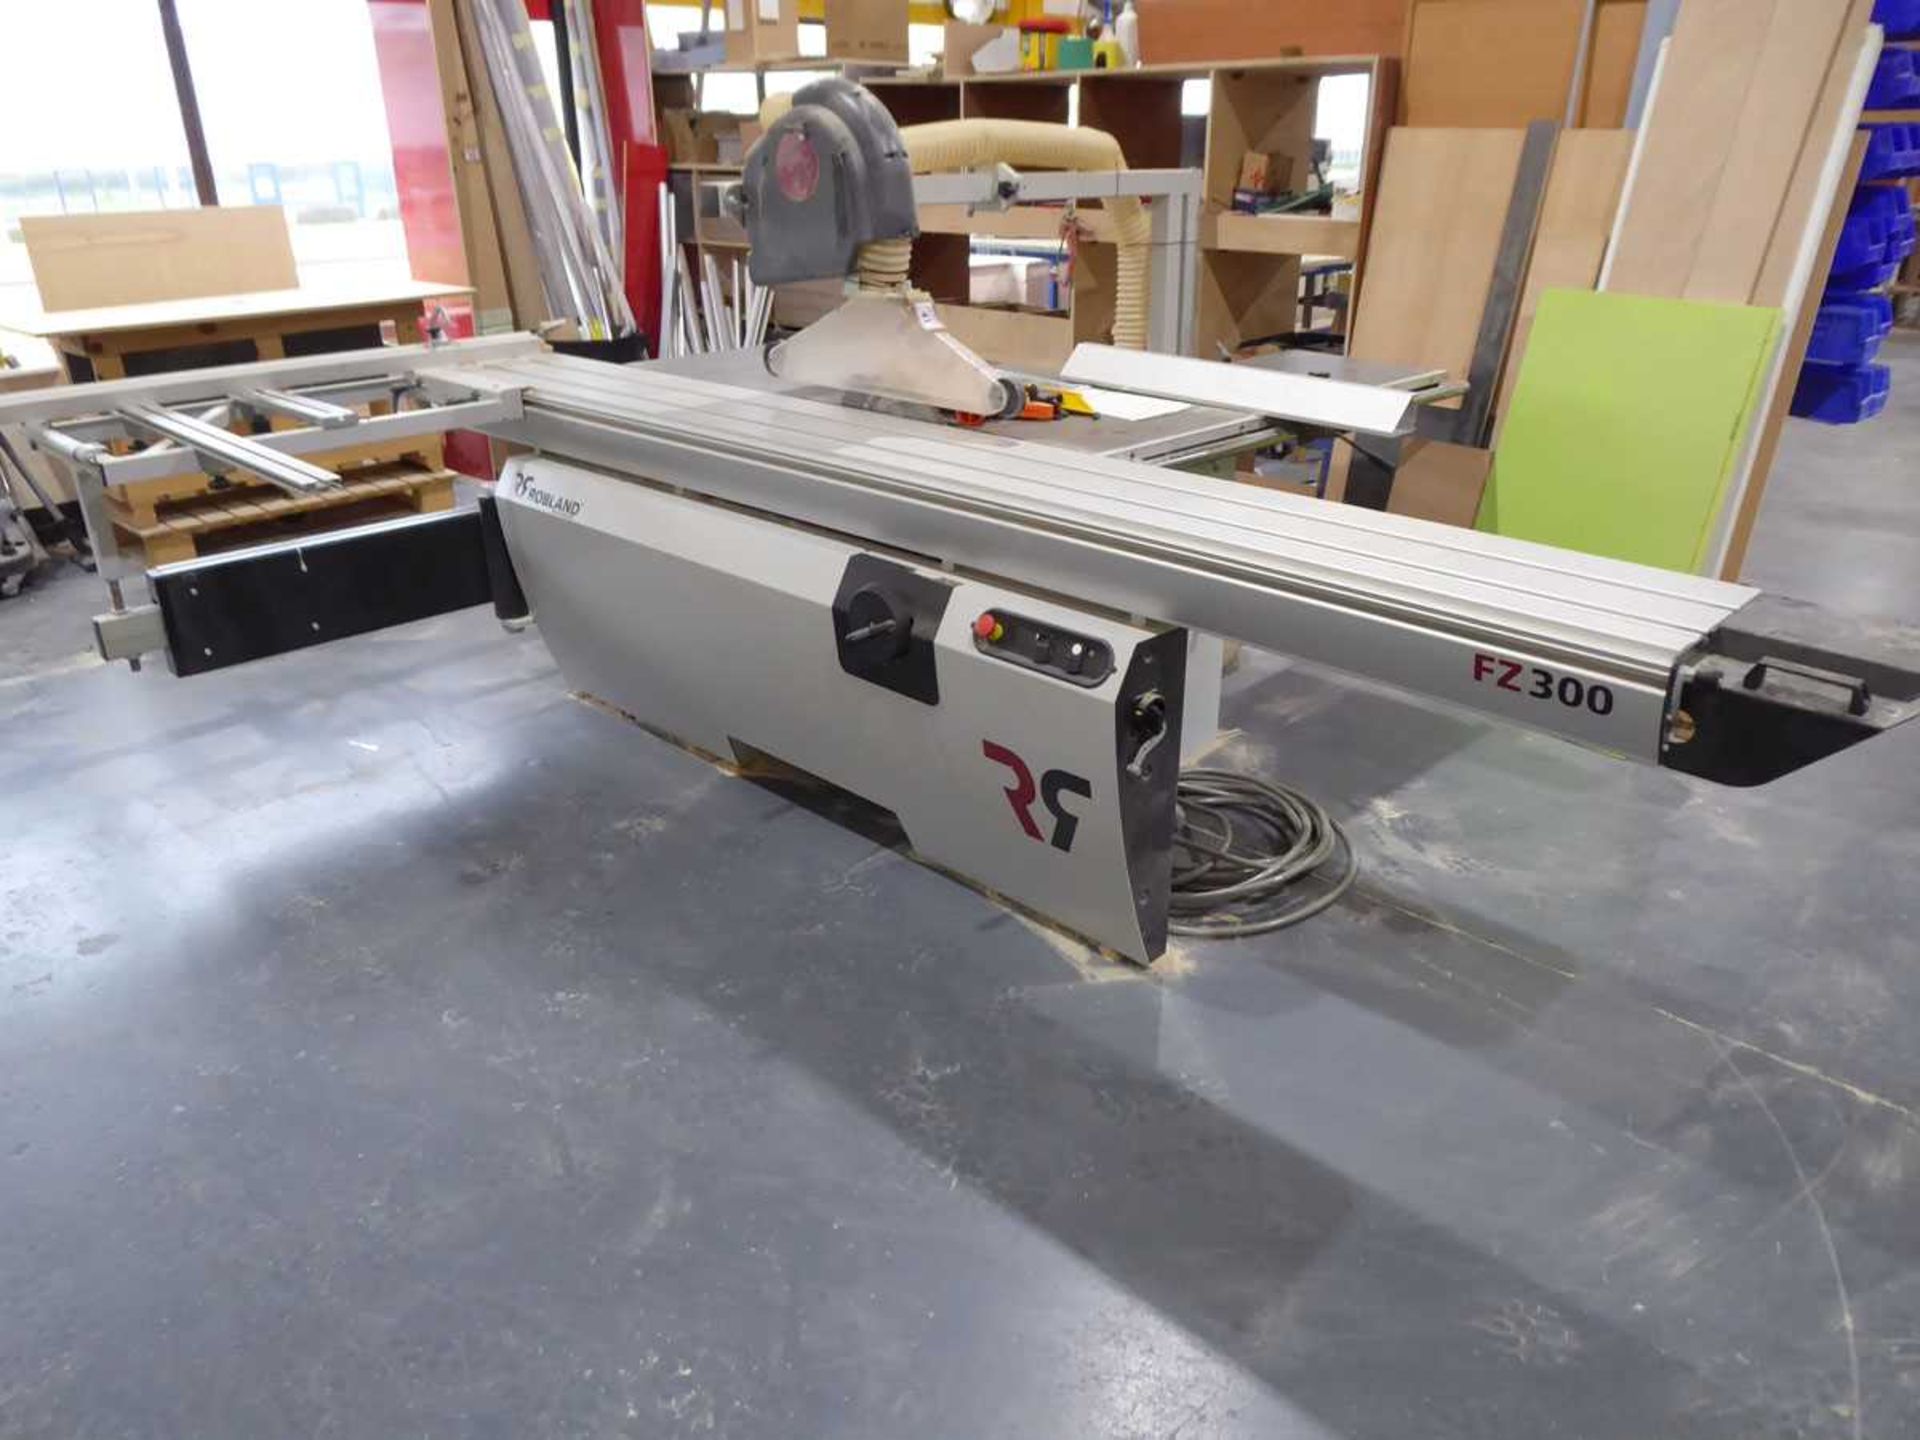 +VAT Robland FZ300 sliding table panel saw, serial no. 26KL22556, year 2020